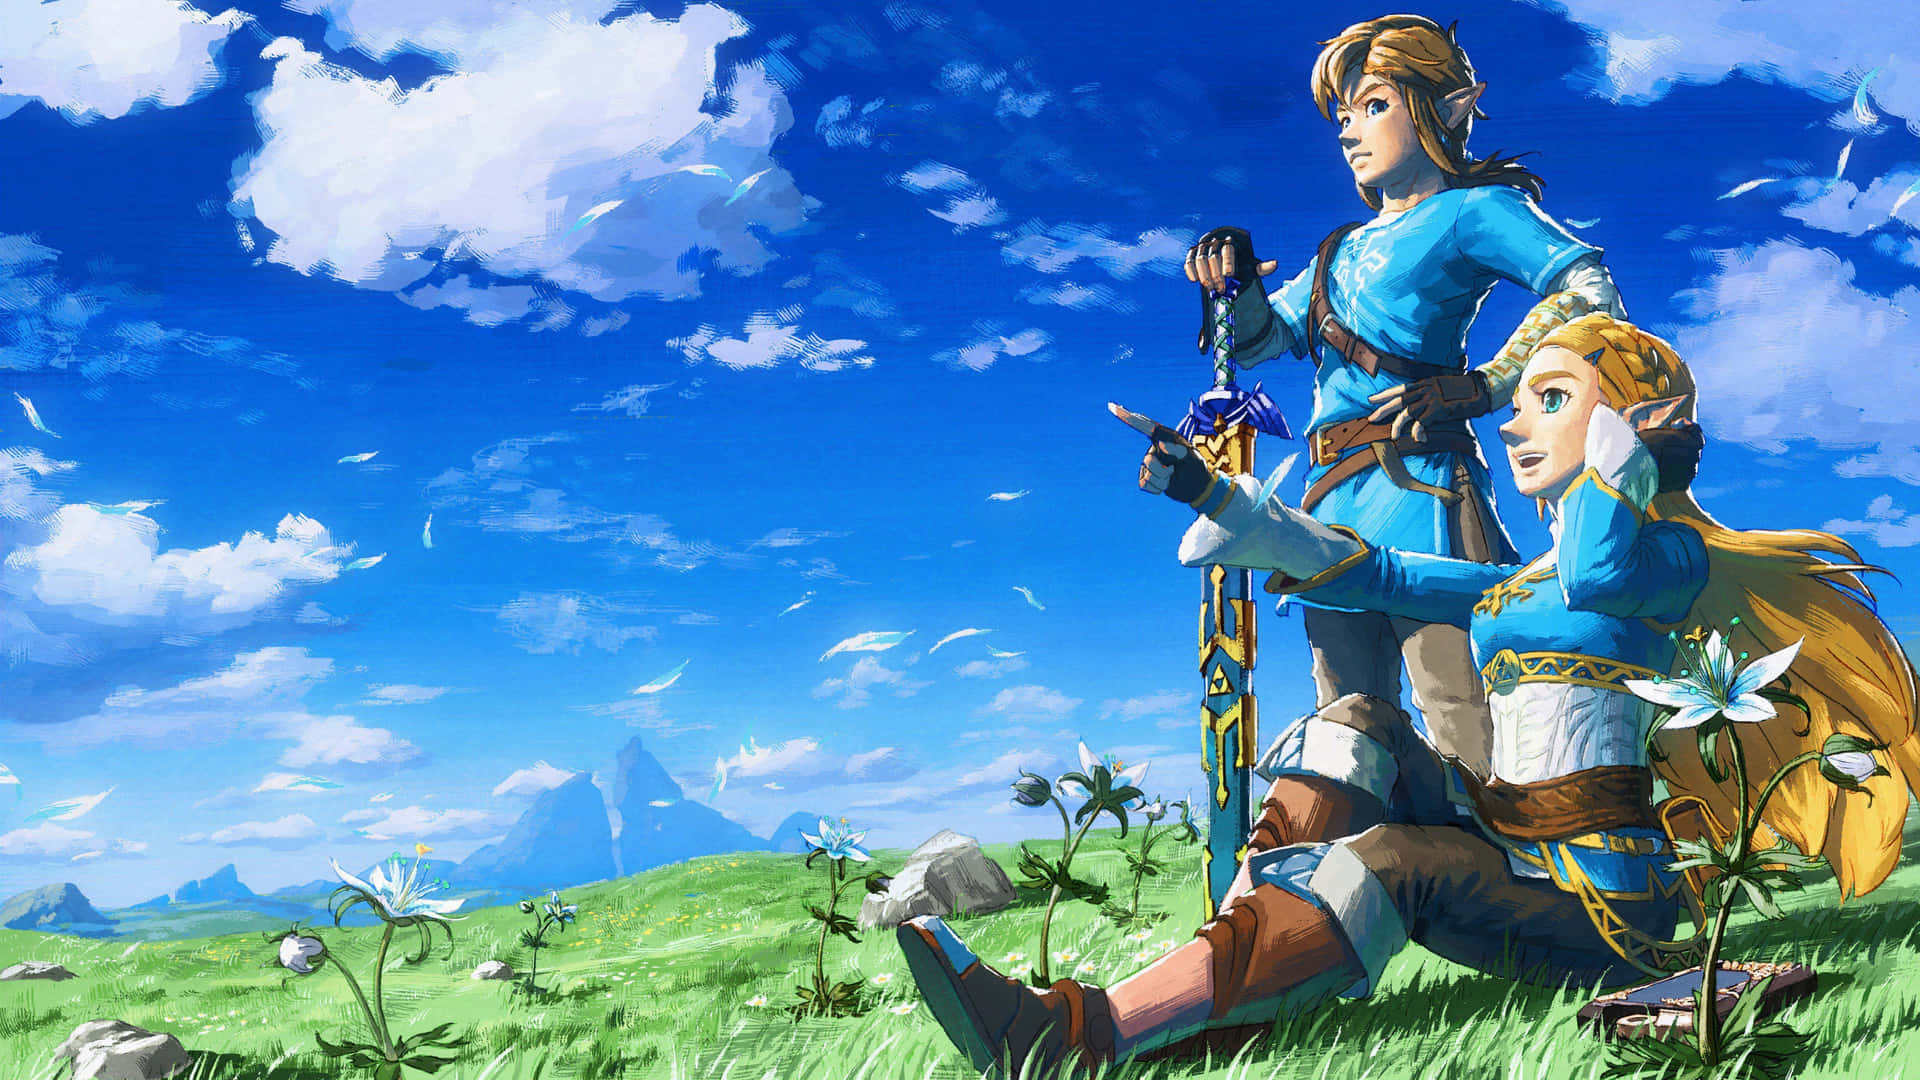 “Experience the Adventure of Zelda: Breath Of The Wild in Stunning 4K Quality!” Wallpaper